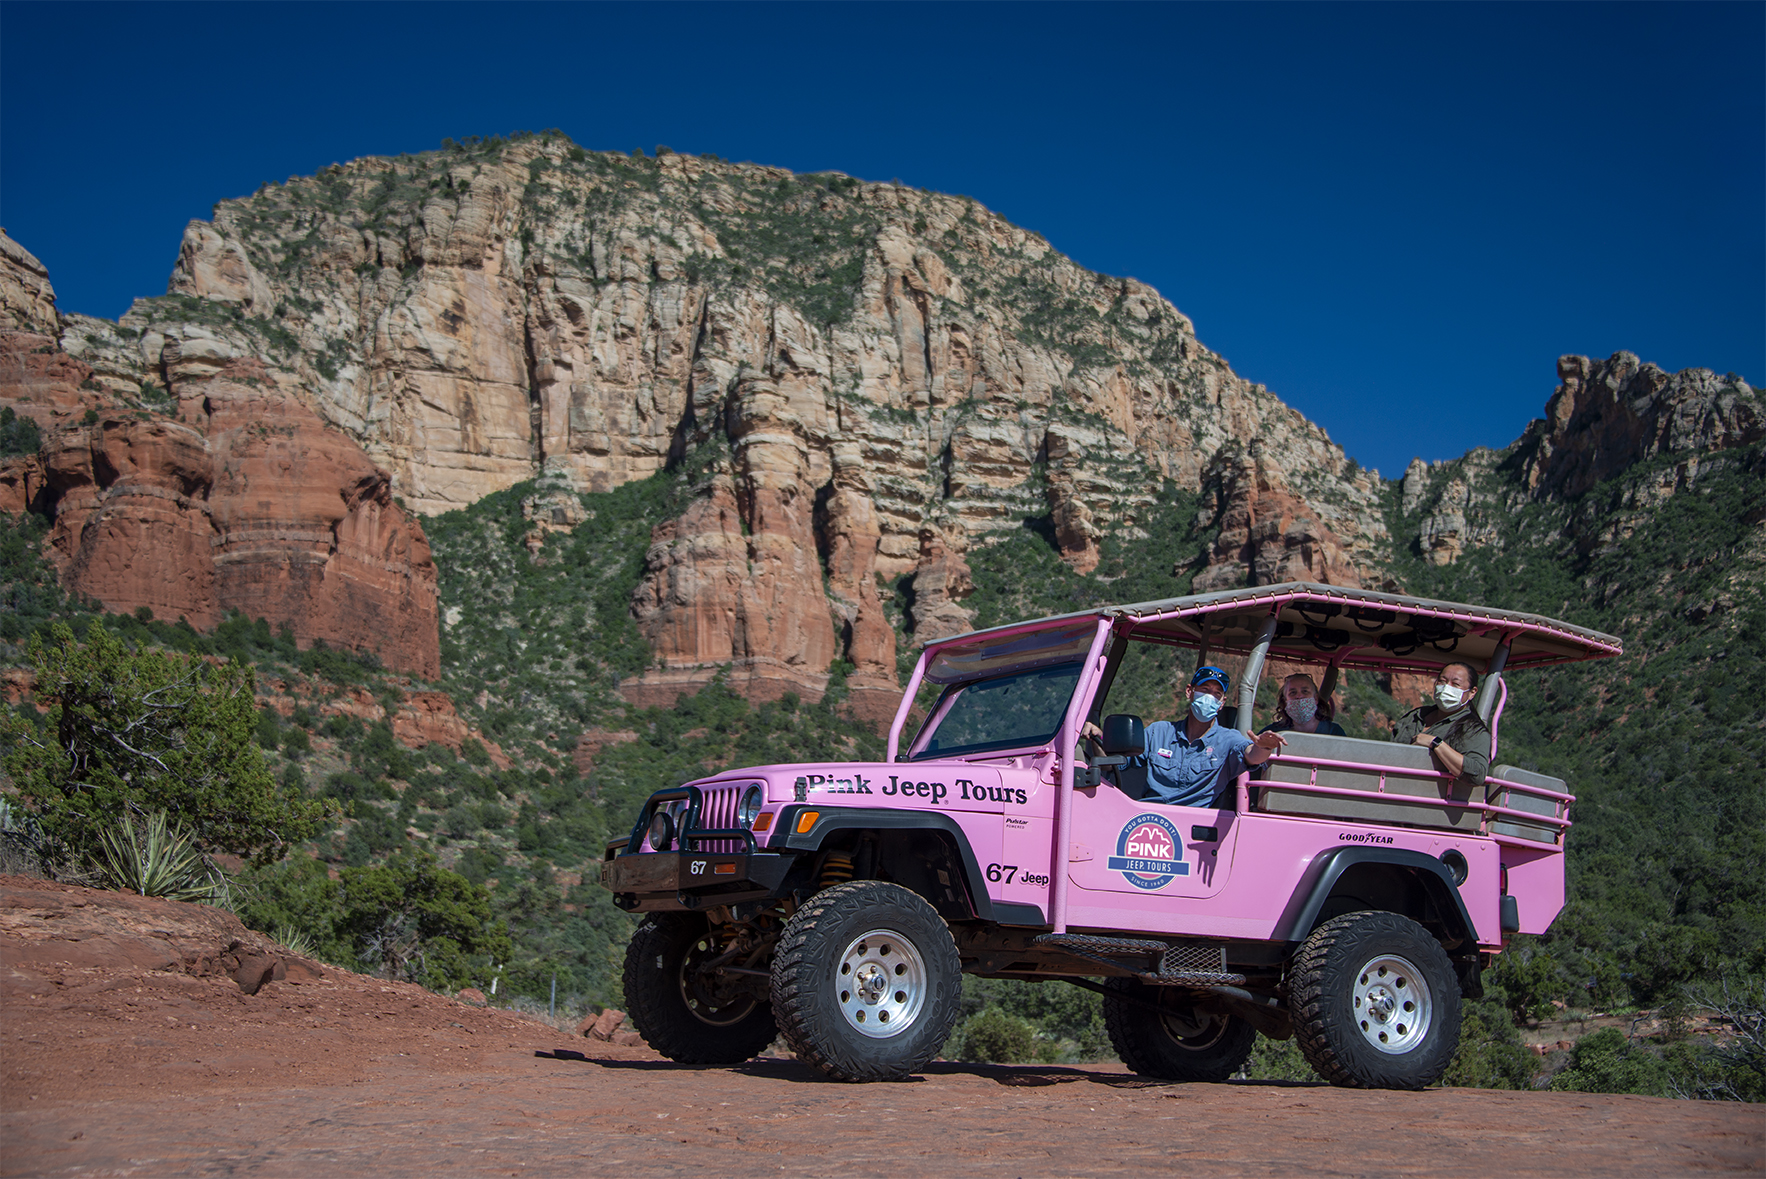 Since re-opening, hundreds of families have safely enjoyed unforgettable thrills and views in Sedona, AZ with PINK® Jeep® Tours